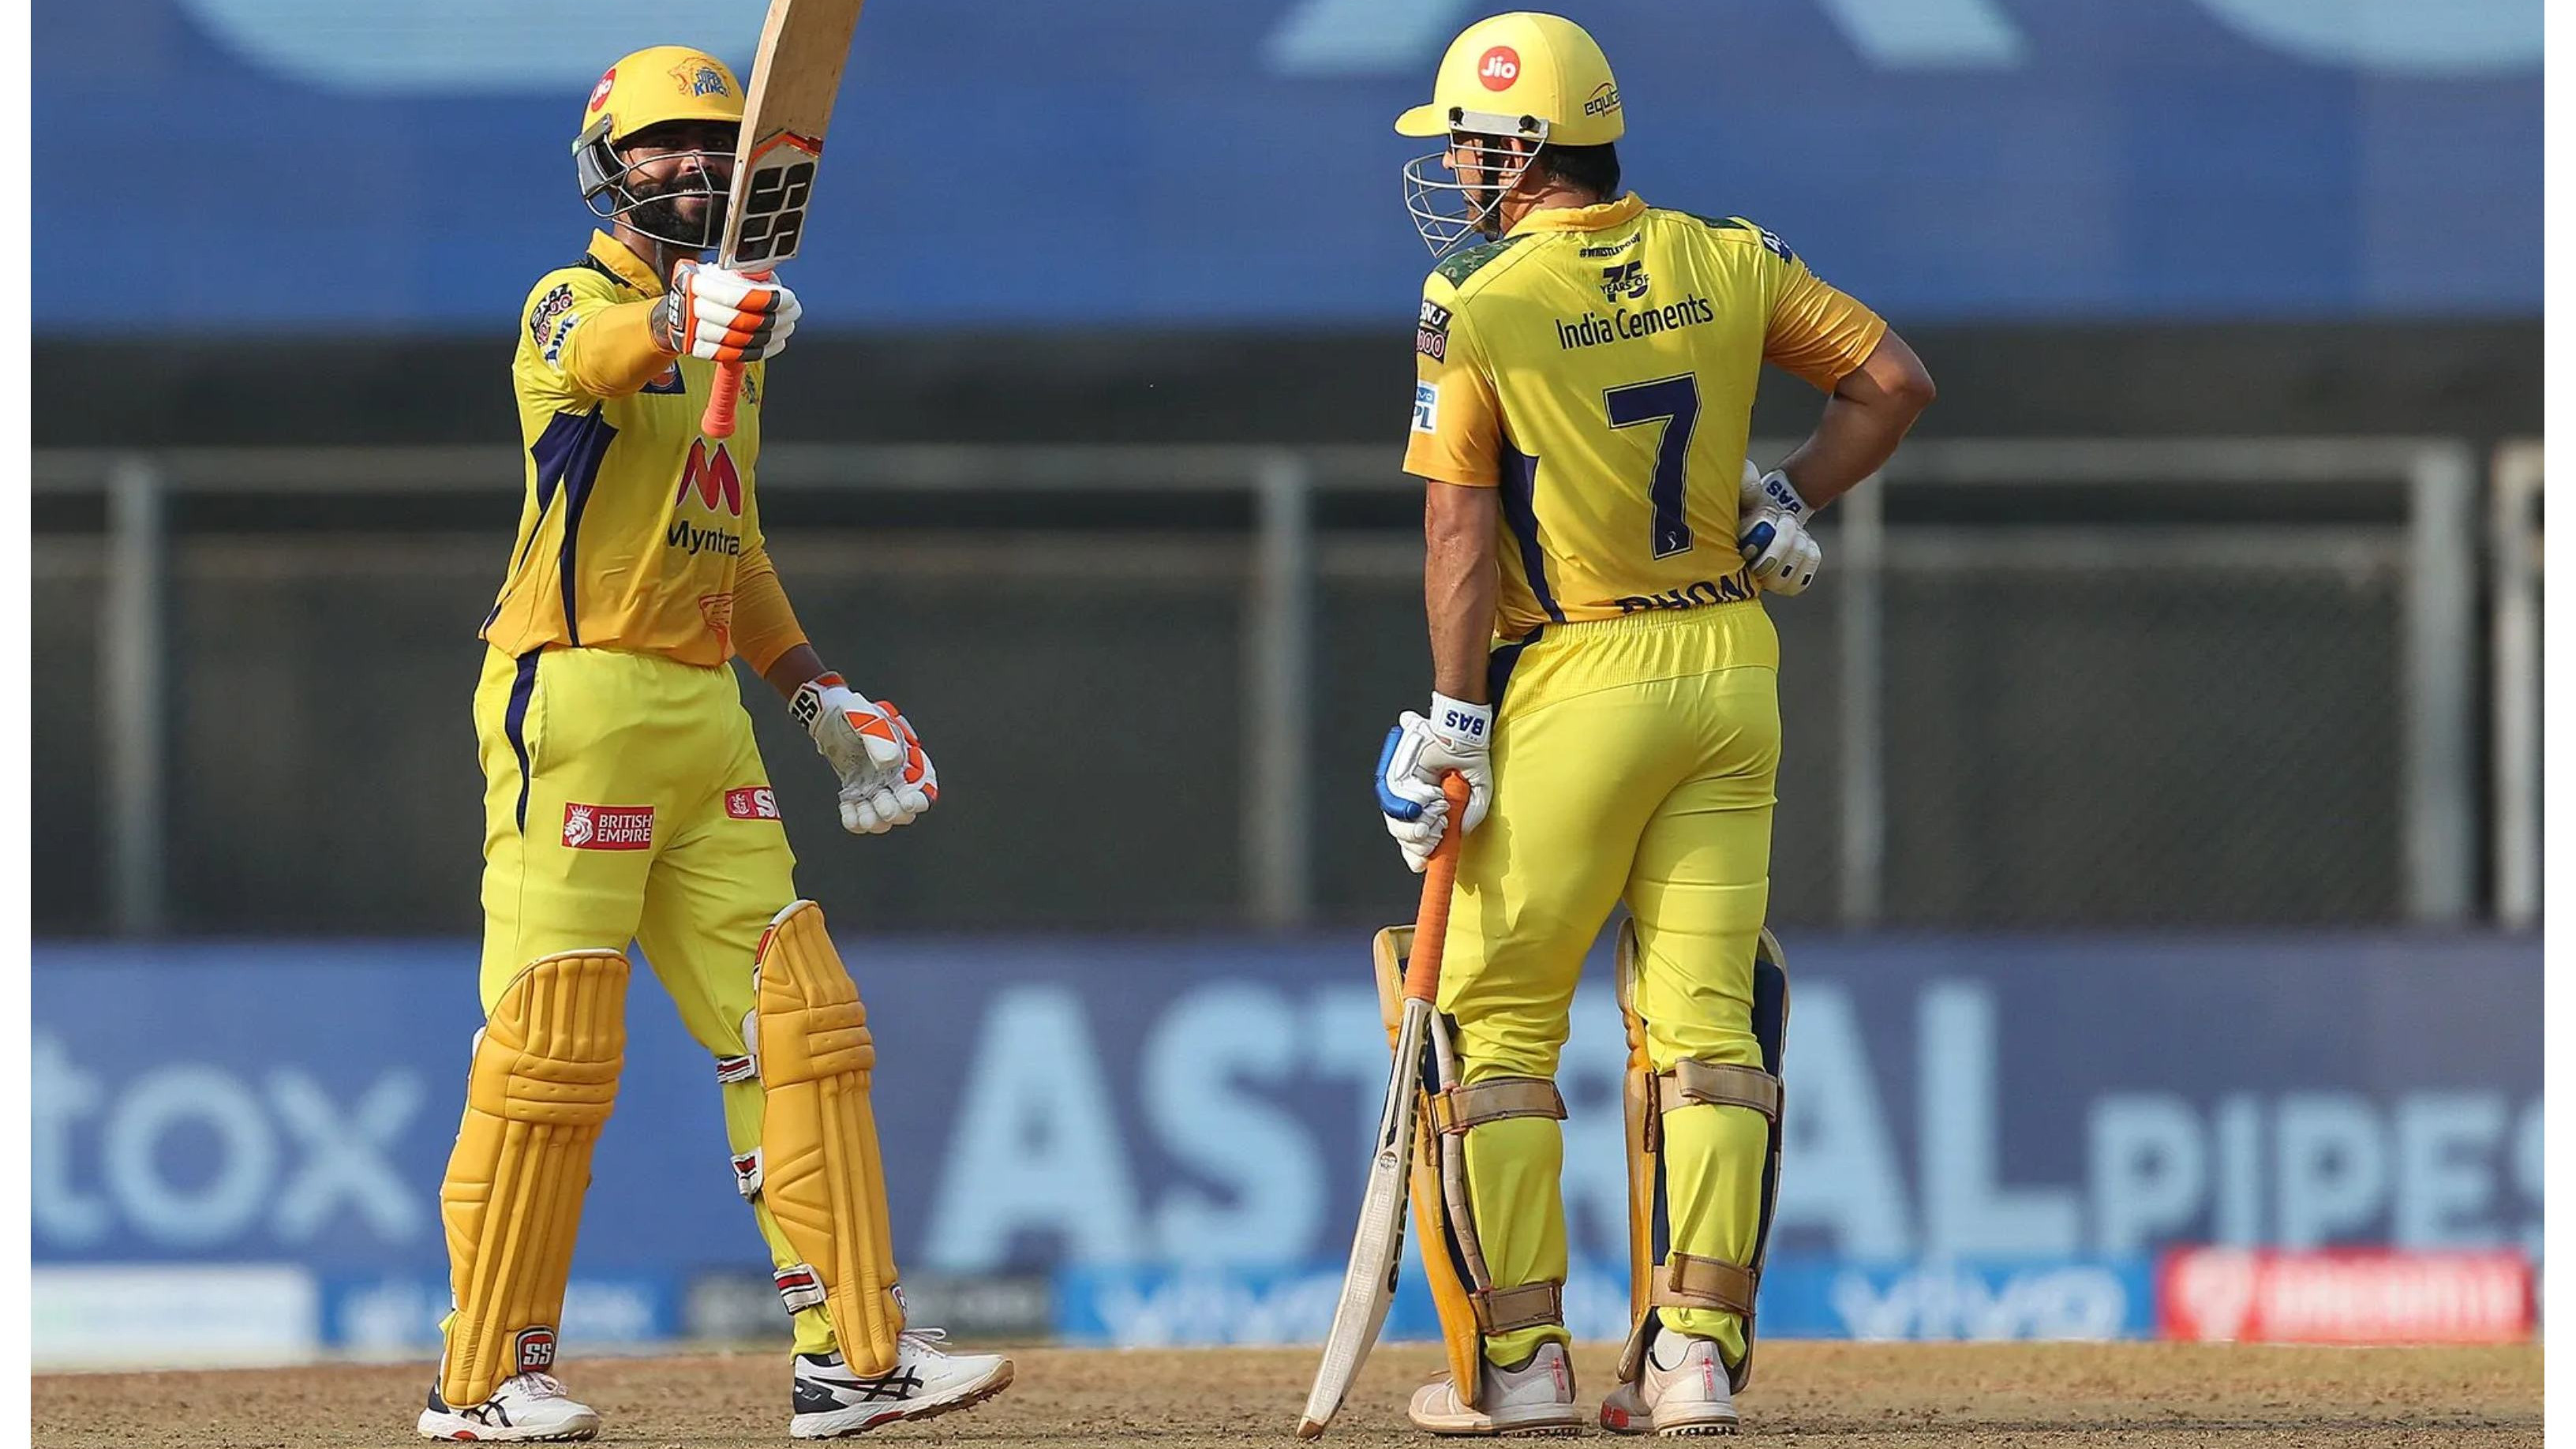 IPL 2021: Ravindra Jadeja credits MS Dhoni for his assault on Harshal Patel in the last over of CSK’s innings